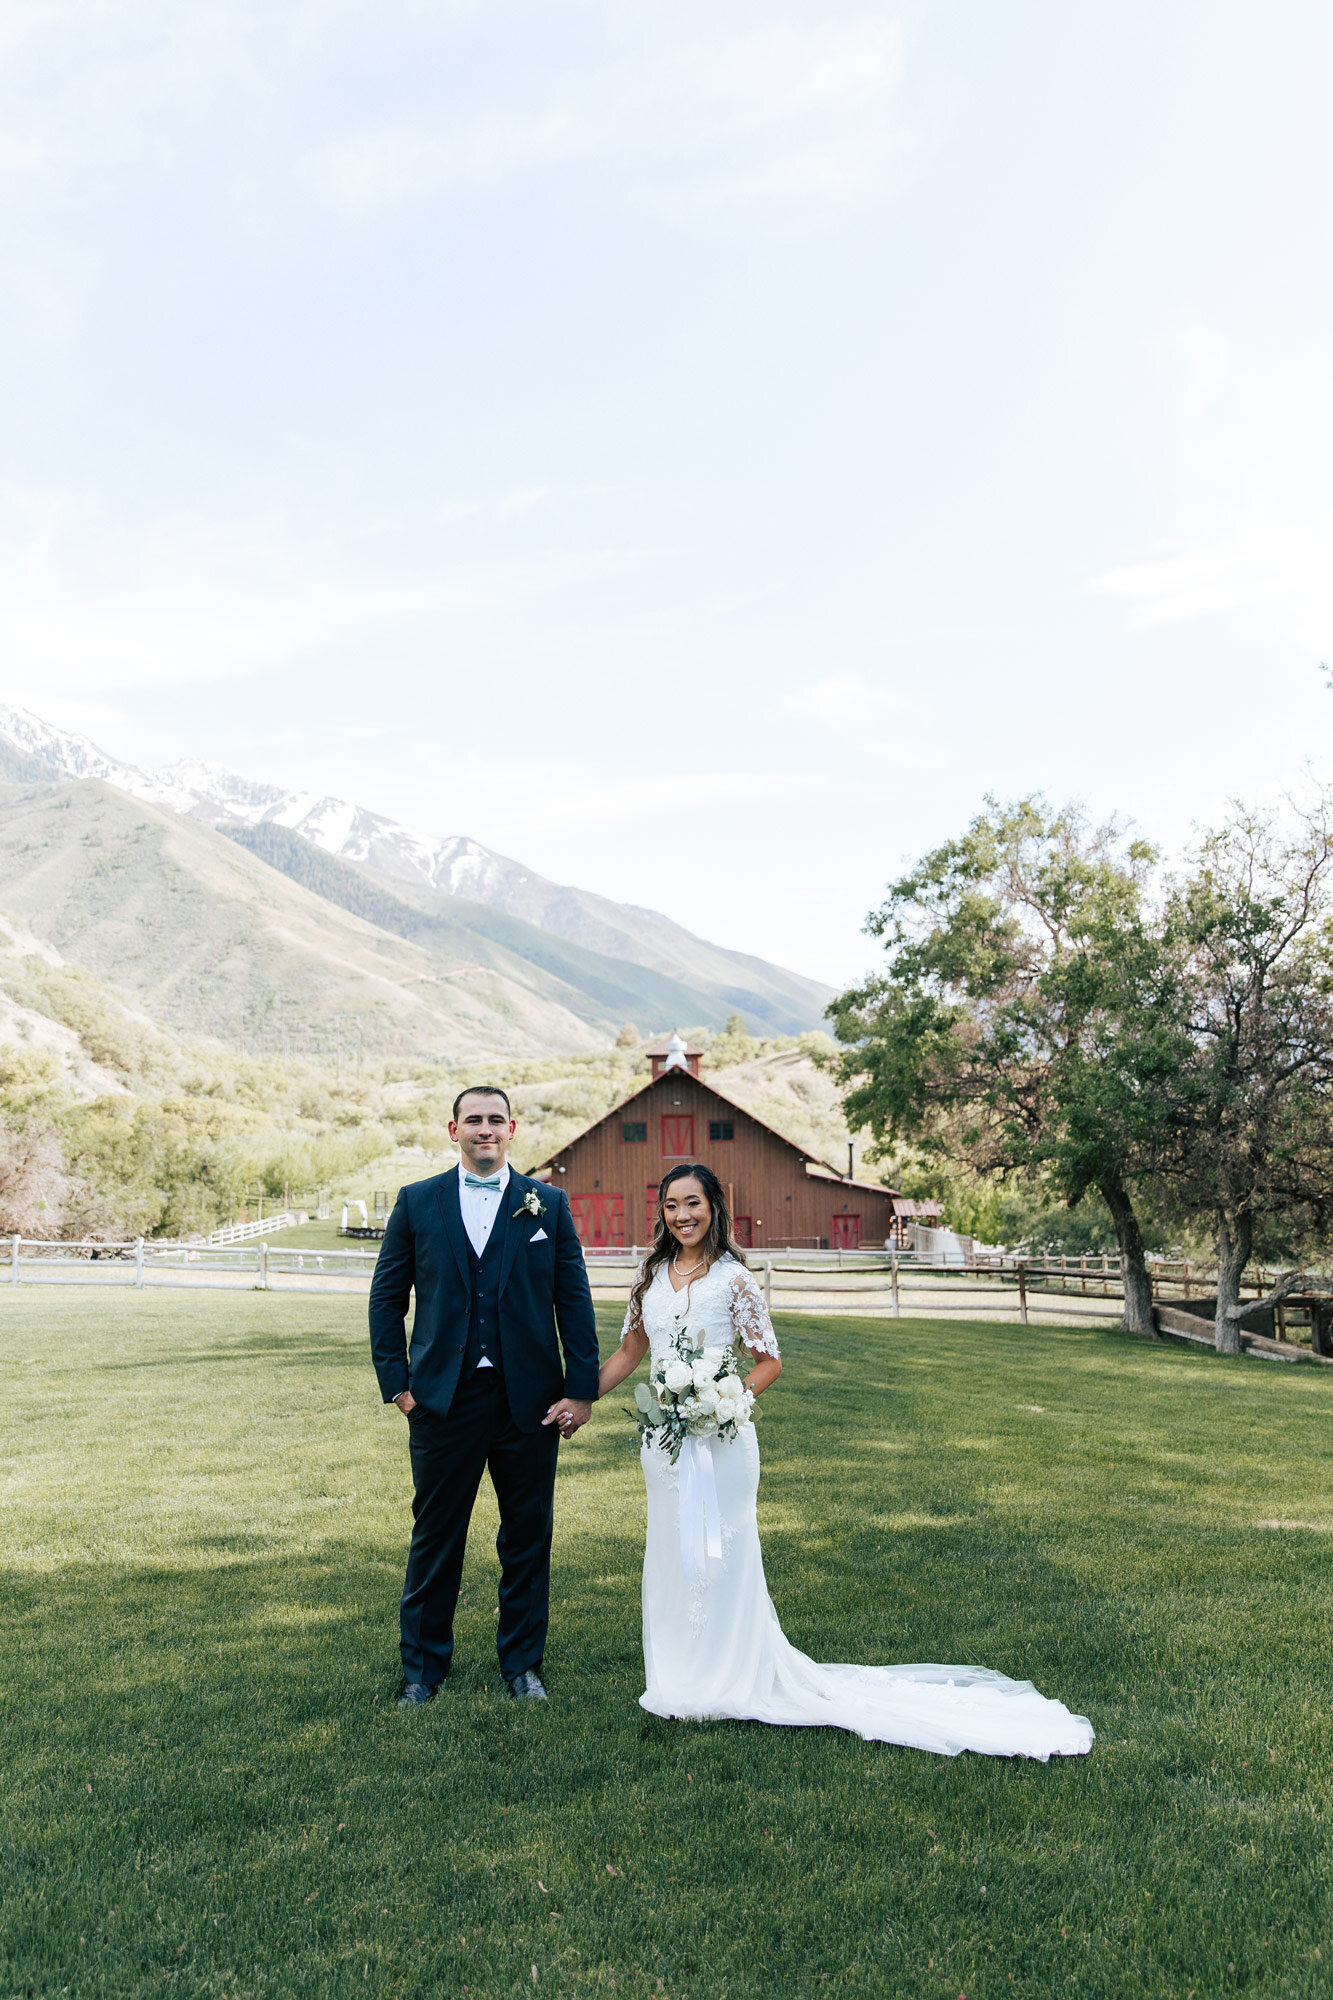  Stunning wedding portraits of a couple in the country in front of a barn with clear blue sky at Quiet Meadow Farms by Emily Jenkins Photography. country wedding portraits cowboy and cowgirl bridals #emilyjenkinsphotography #emilyjenkinsweddings #uta